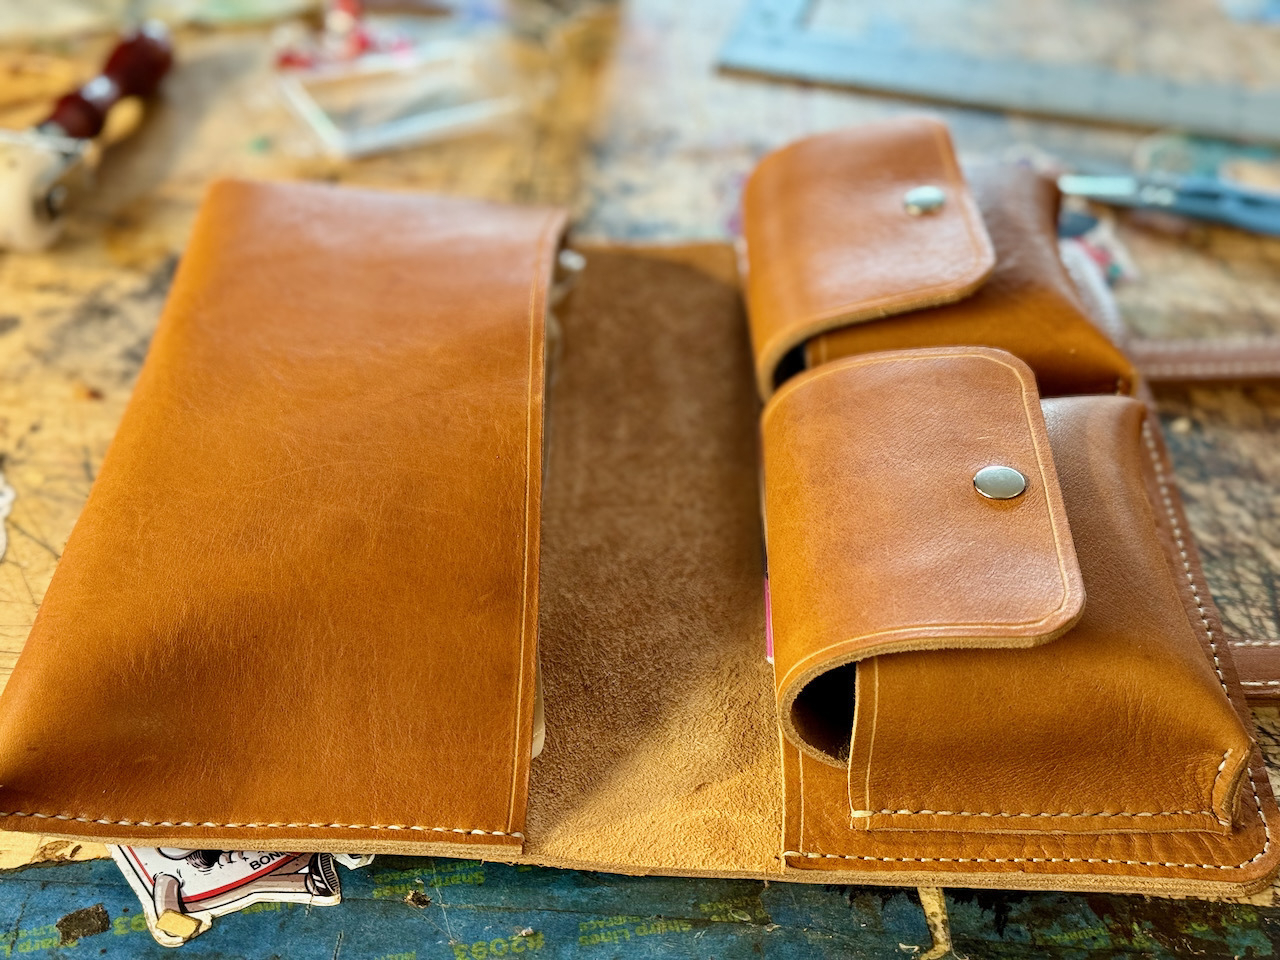 Viewing a leather cigar case from the bottom, seeing the main cigar pocket on the left which is sized to hold a small boveda humidor bag and on the right the two cigar tool pockets are shown closed, each one is sized to fit larger cigar cutters and cigar butane lighters.